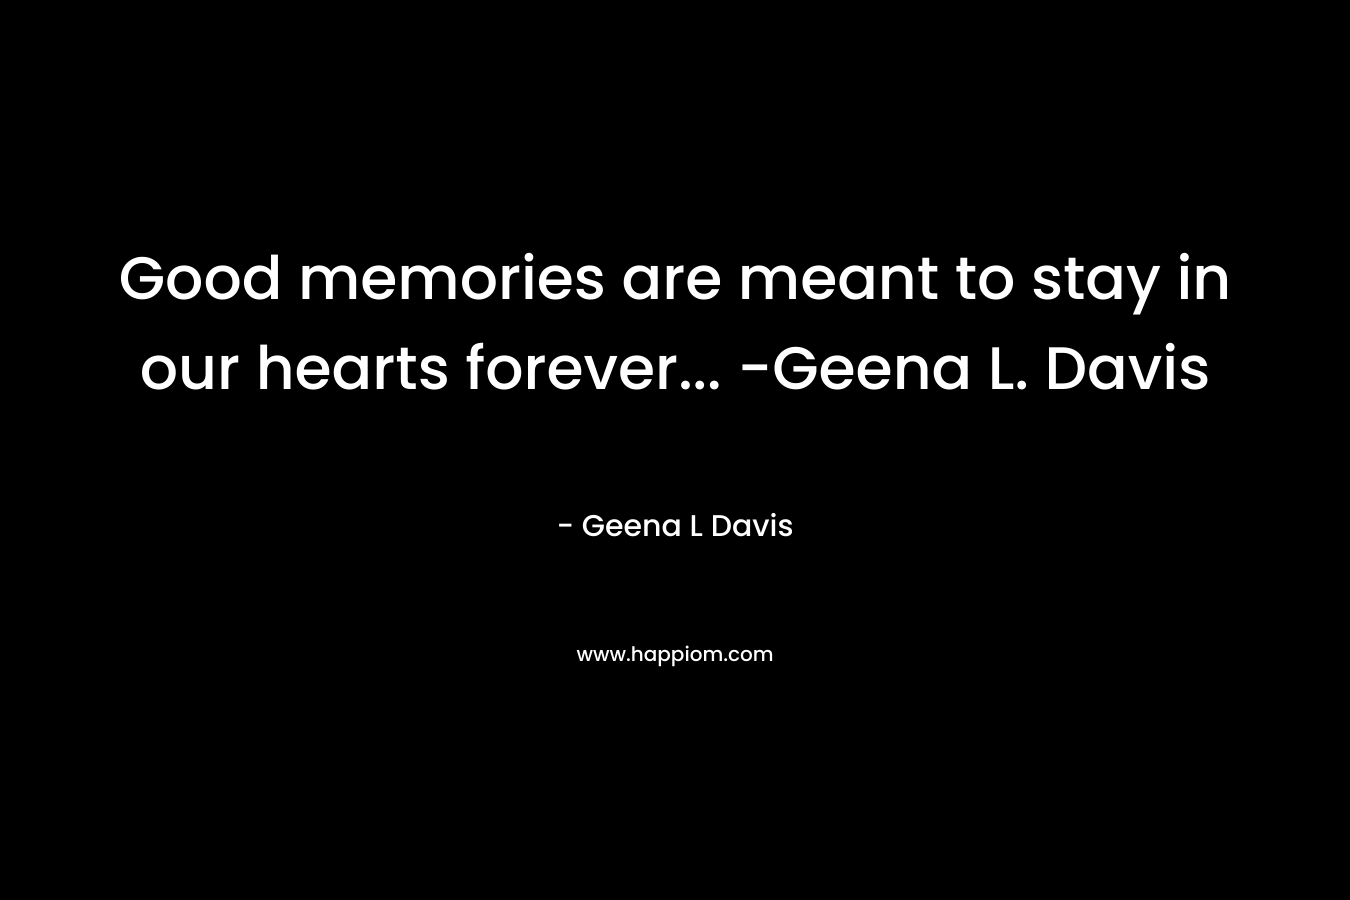 Good memories are meant to stay in our hearts forever... -Geena L. Davis